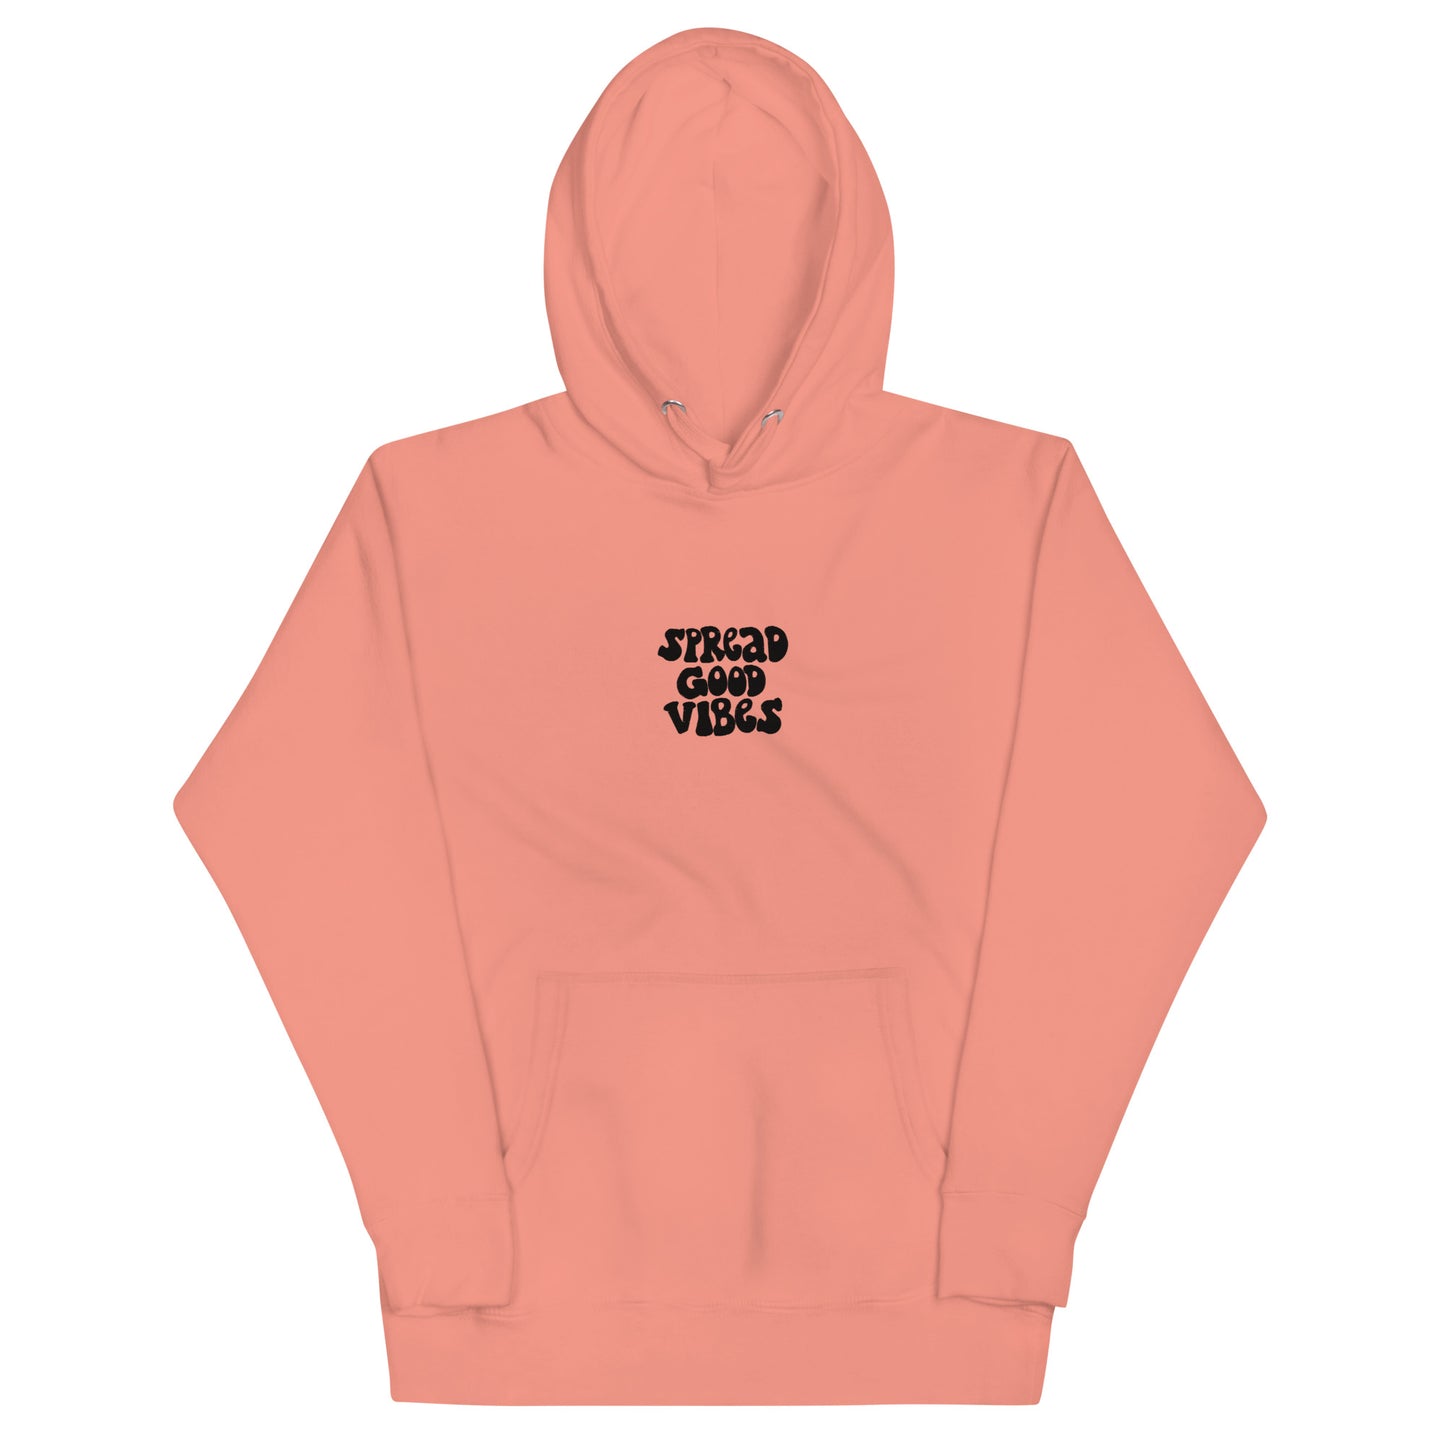 spread good vibes embroidered hoodie